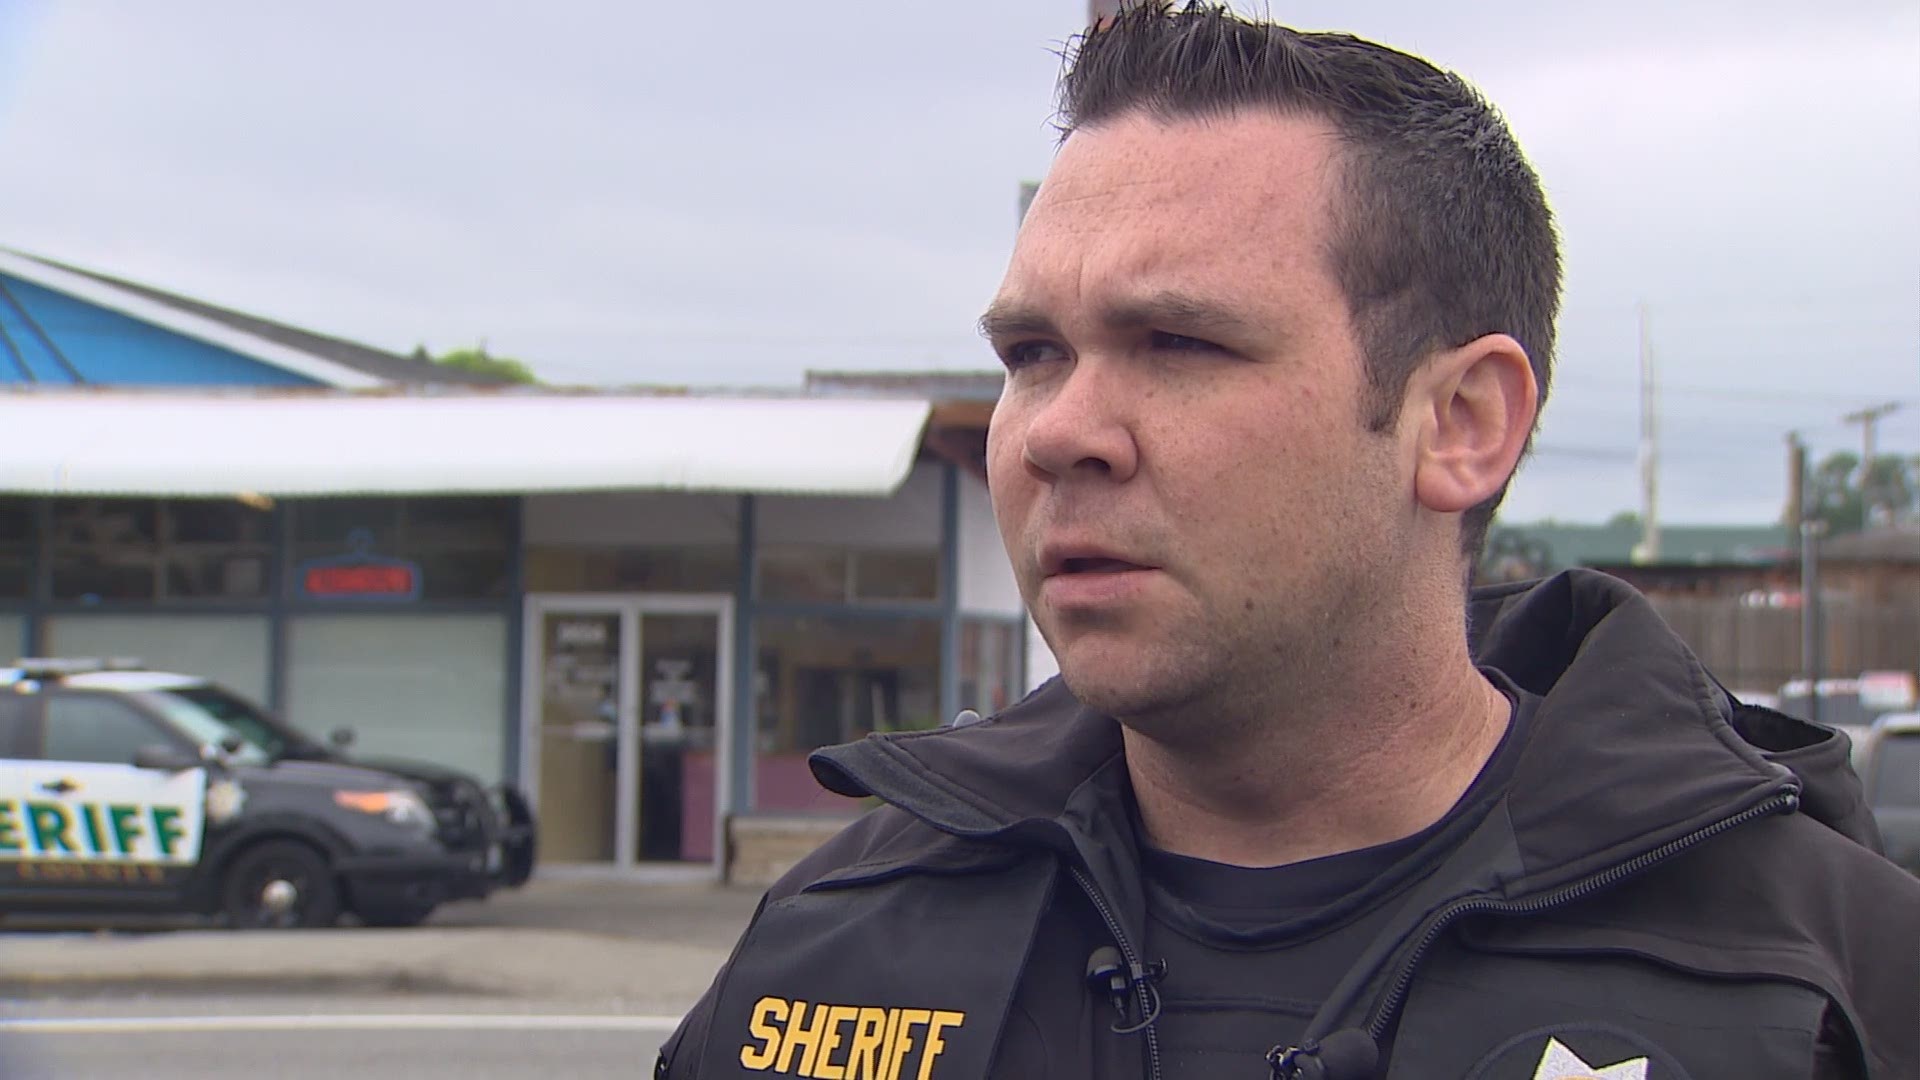 The King County Sheriff's Office is investigating a shooting in White Center that injured at least three people early Sunday.